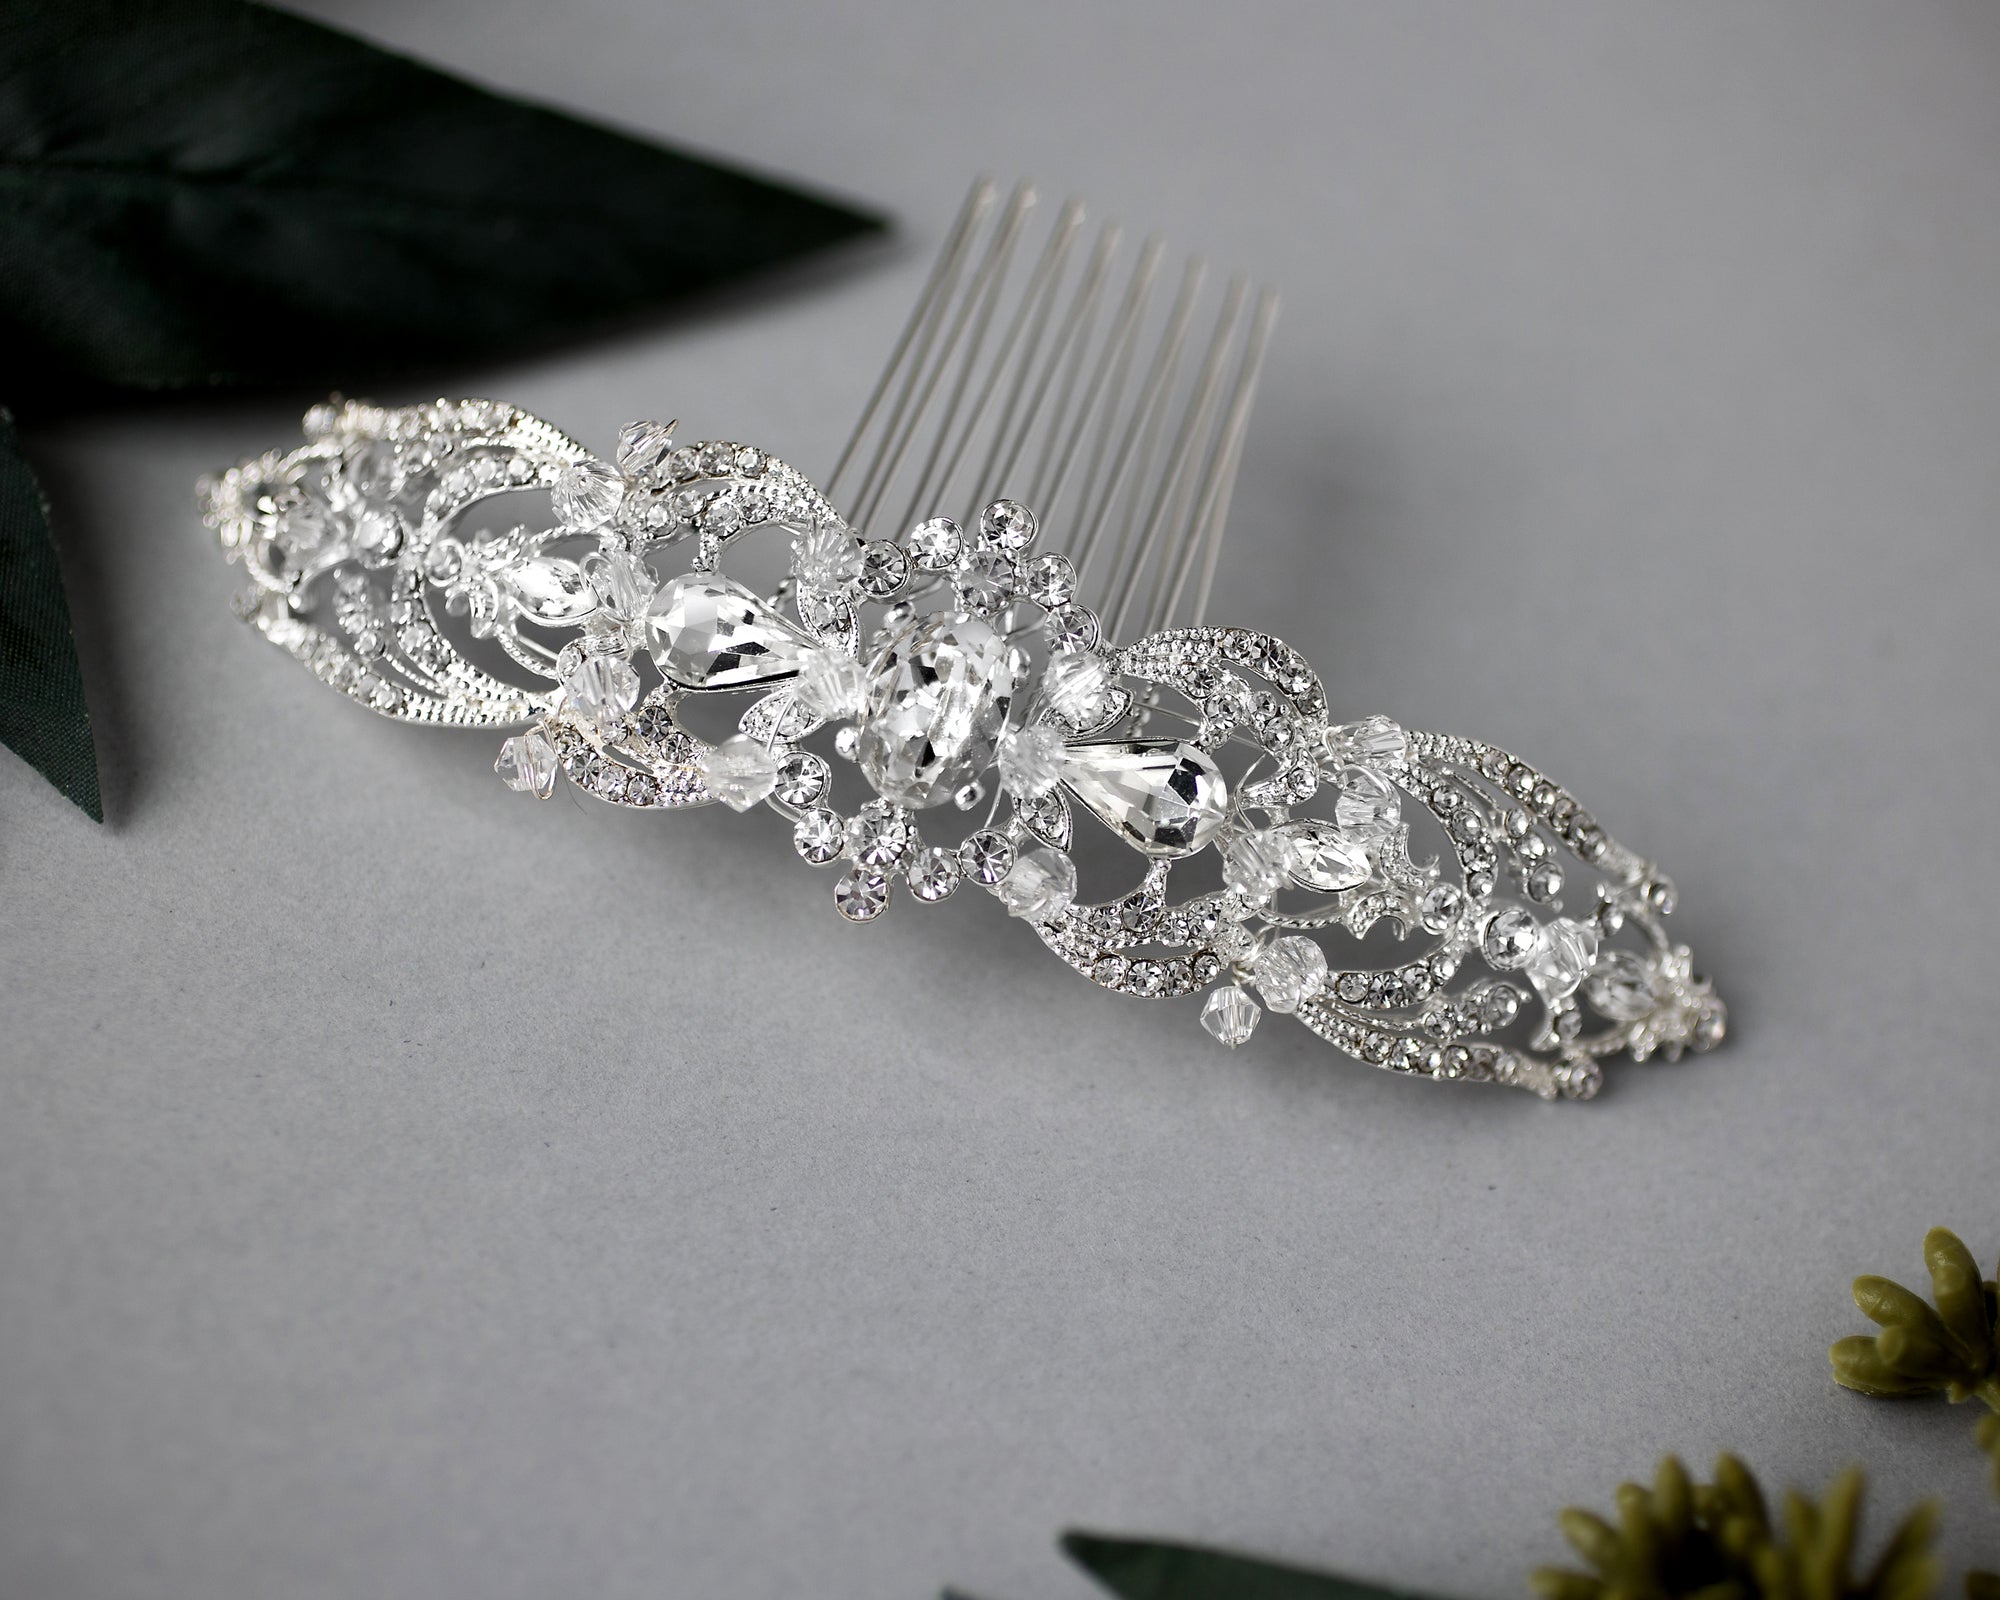 Bridal Hair Comb with Oval Jewel Center - Cassandra Lynne